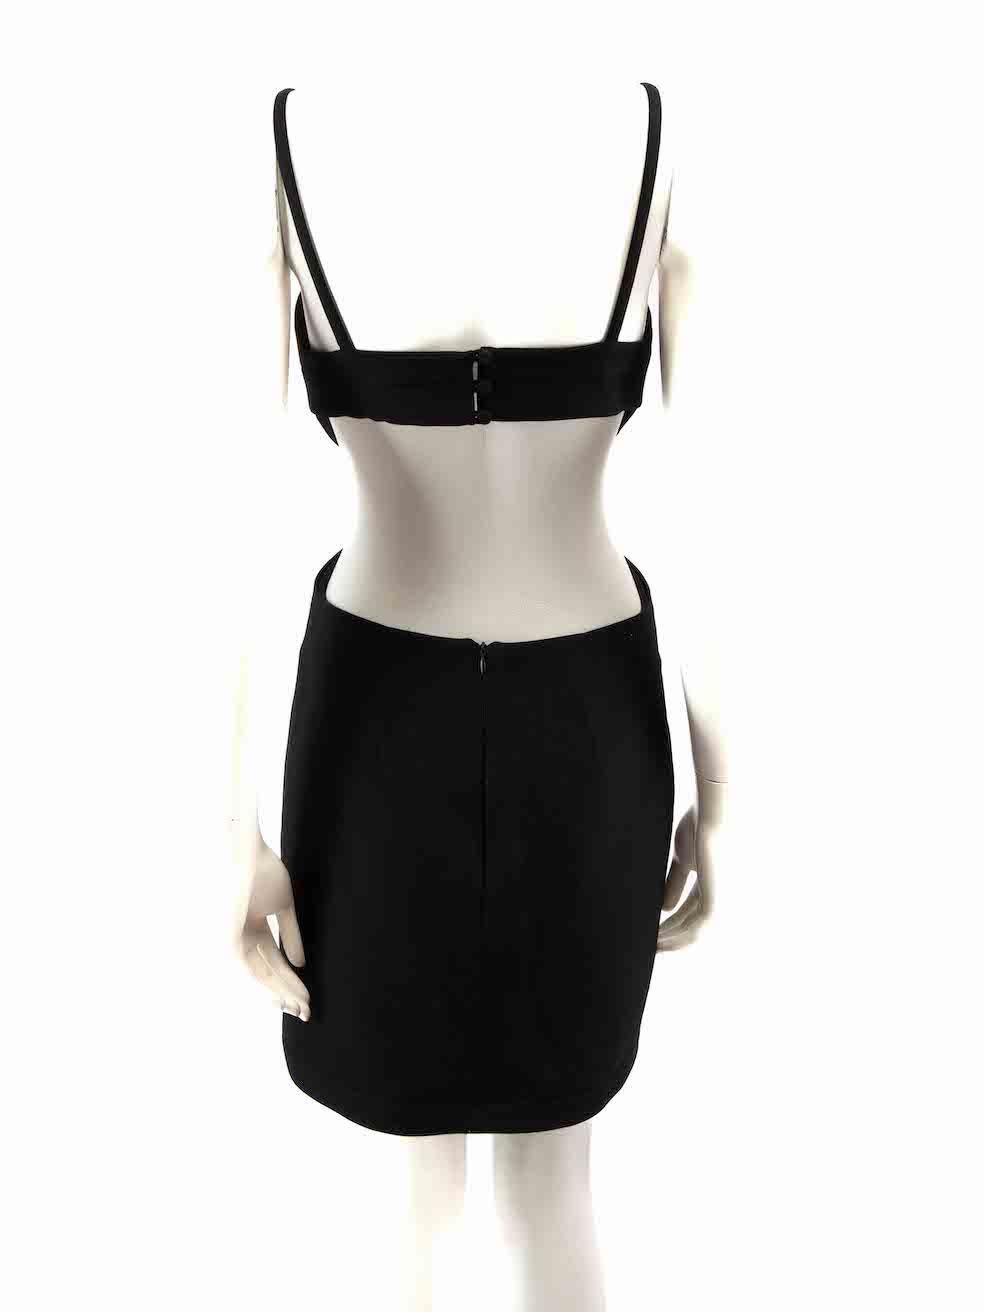 Alexis Black Tokyo Cut Out Mini Dress Size M In Good Condition For Sale In London, GB